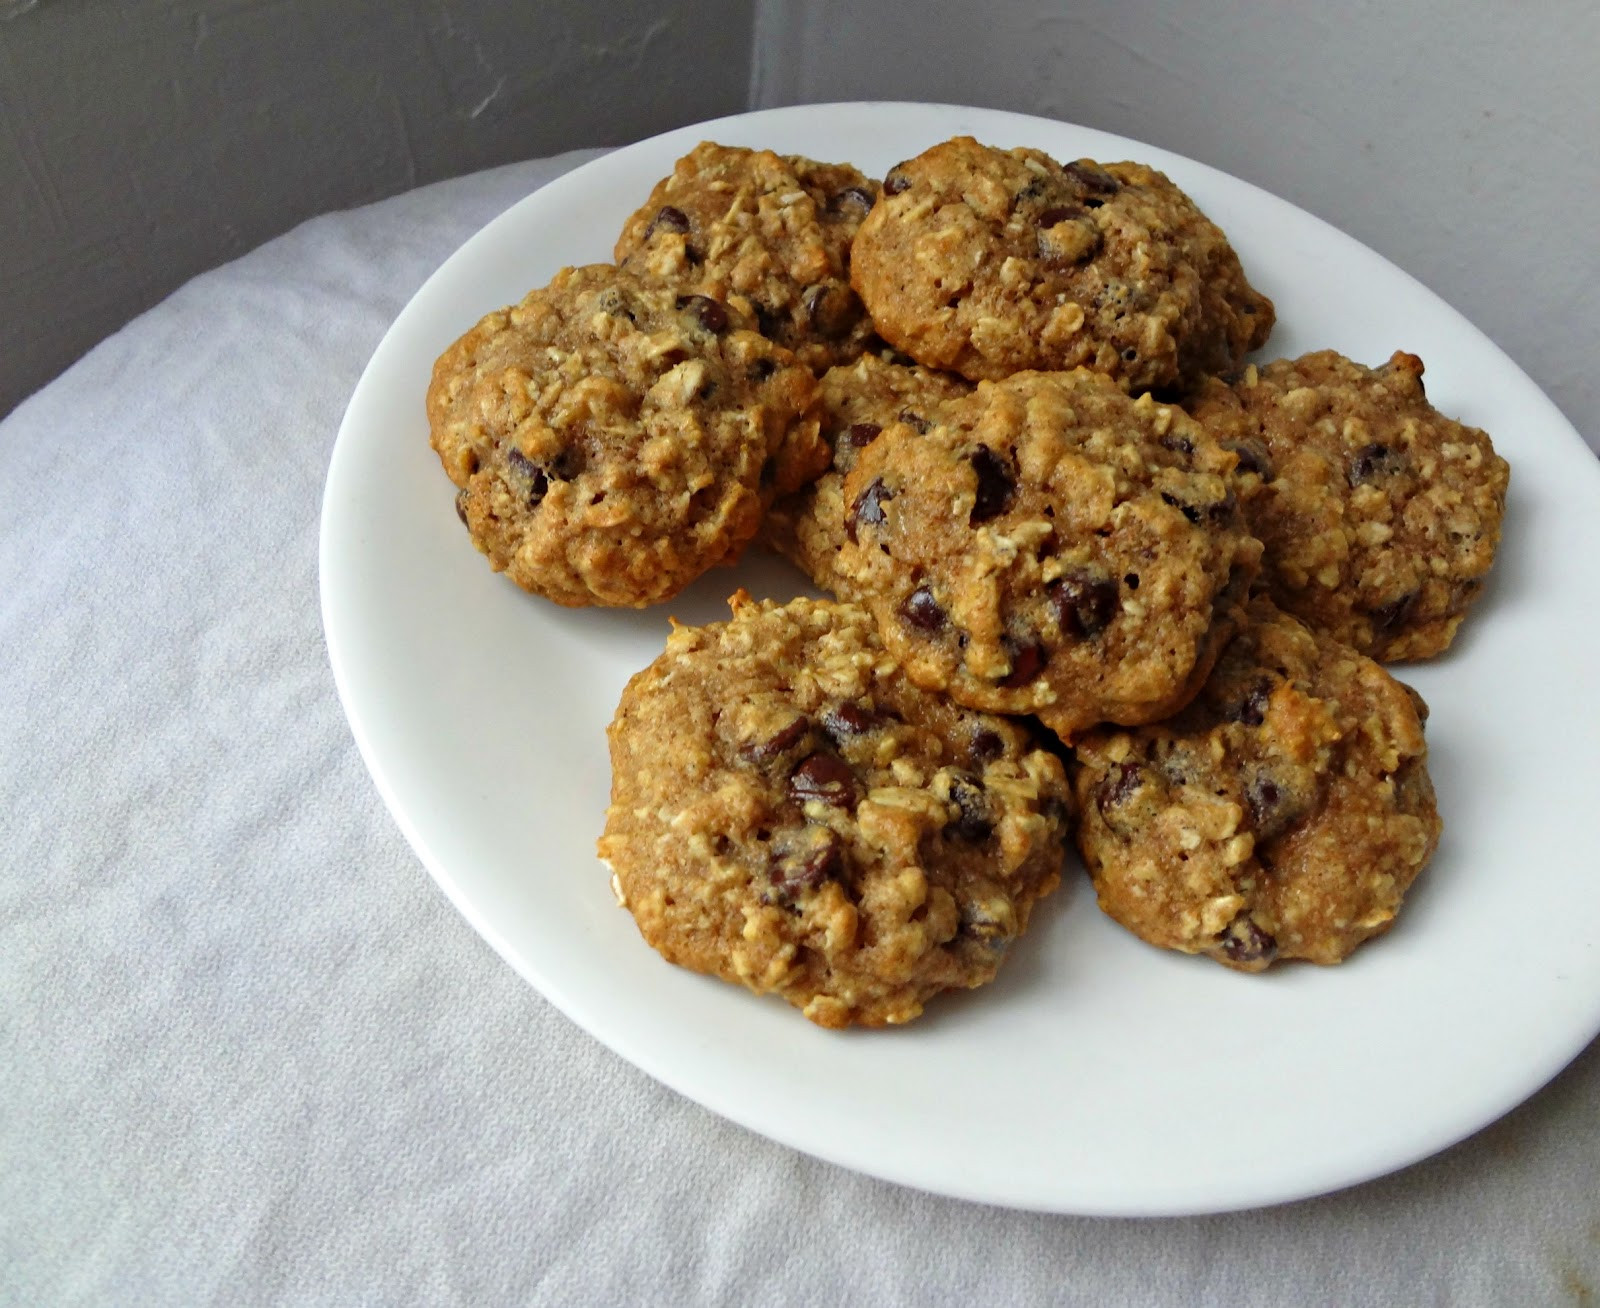 Healthy Chocolate Oatmeal Cookies
 The Cooking Actress Healthy Oatmeal Chocolate Chip Cookies